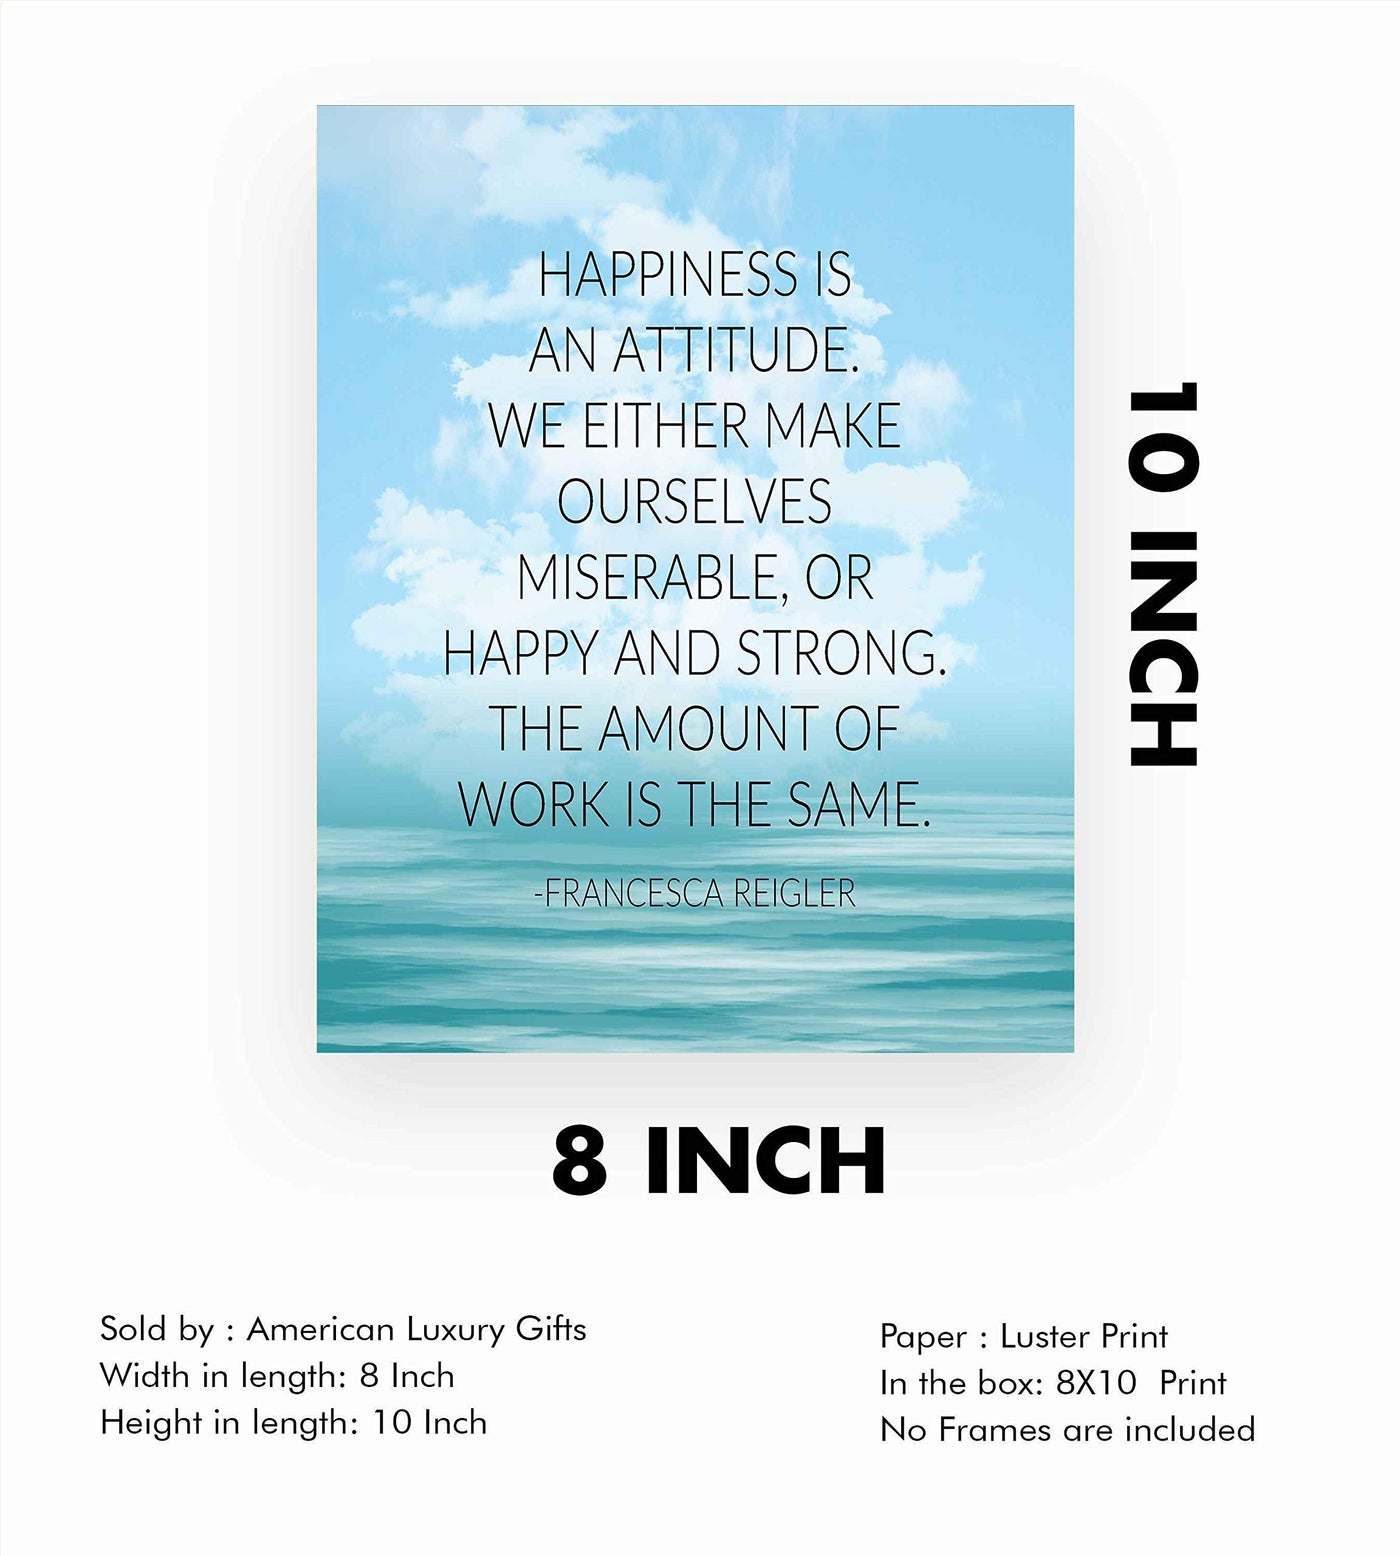 Happiness Is An Attitude-Inspirational Quotes Wall Art-8 x 10" Modern Typographic Print-Ready to Frame. Positive Quote by Francesca Reigler. Home-Office-School-Dorm Decor. Great Gift & Life Lesson!